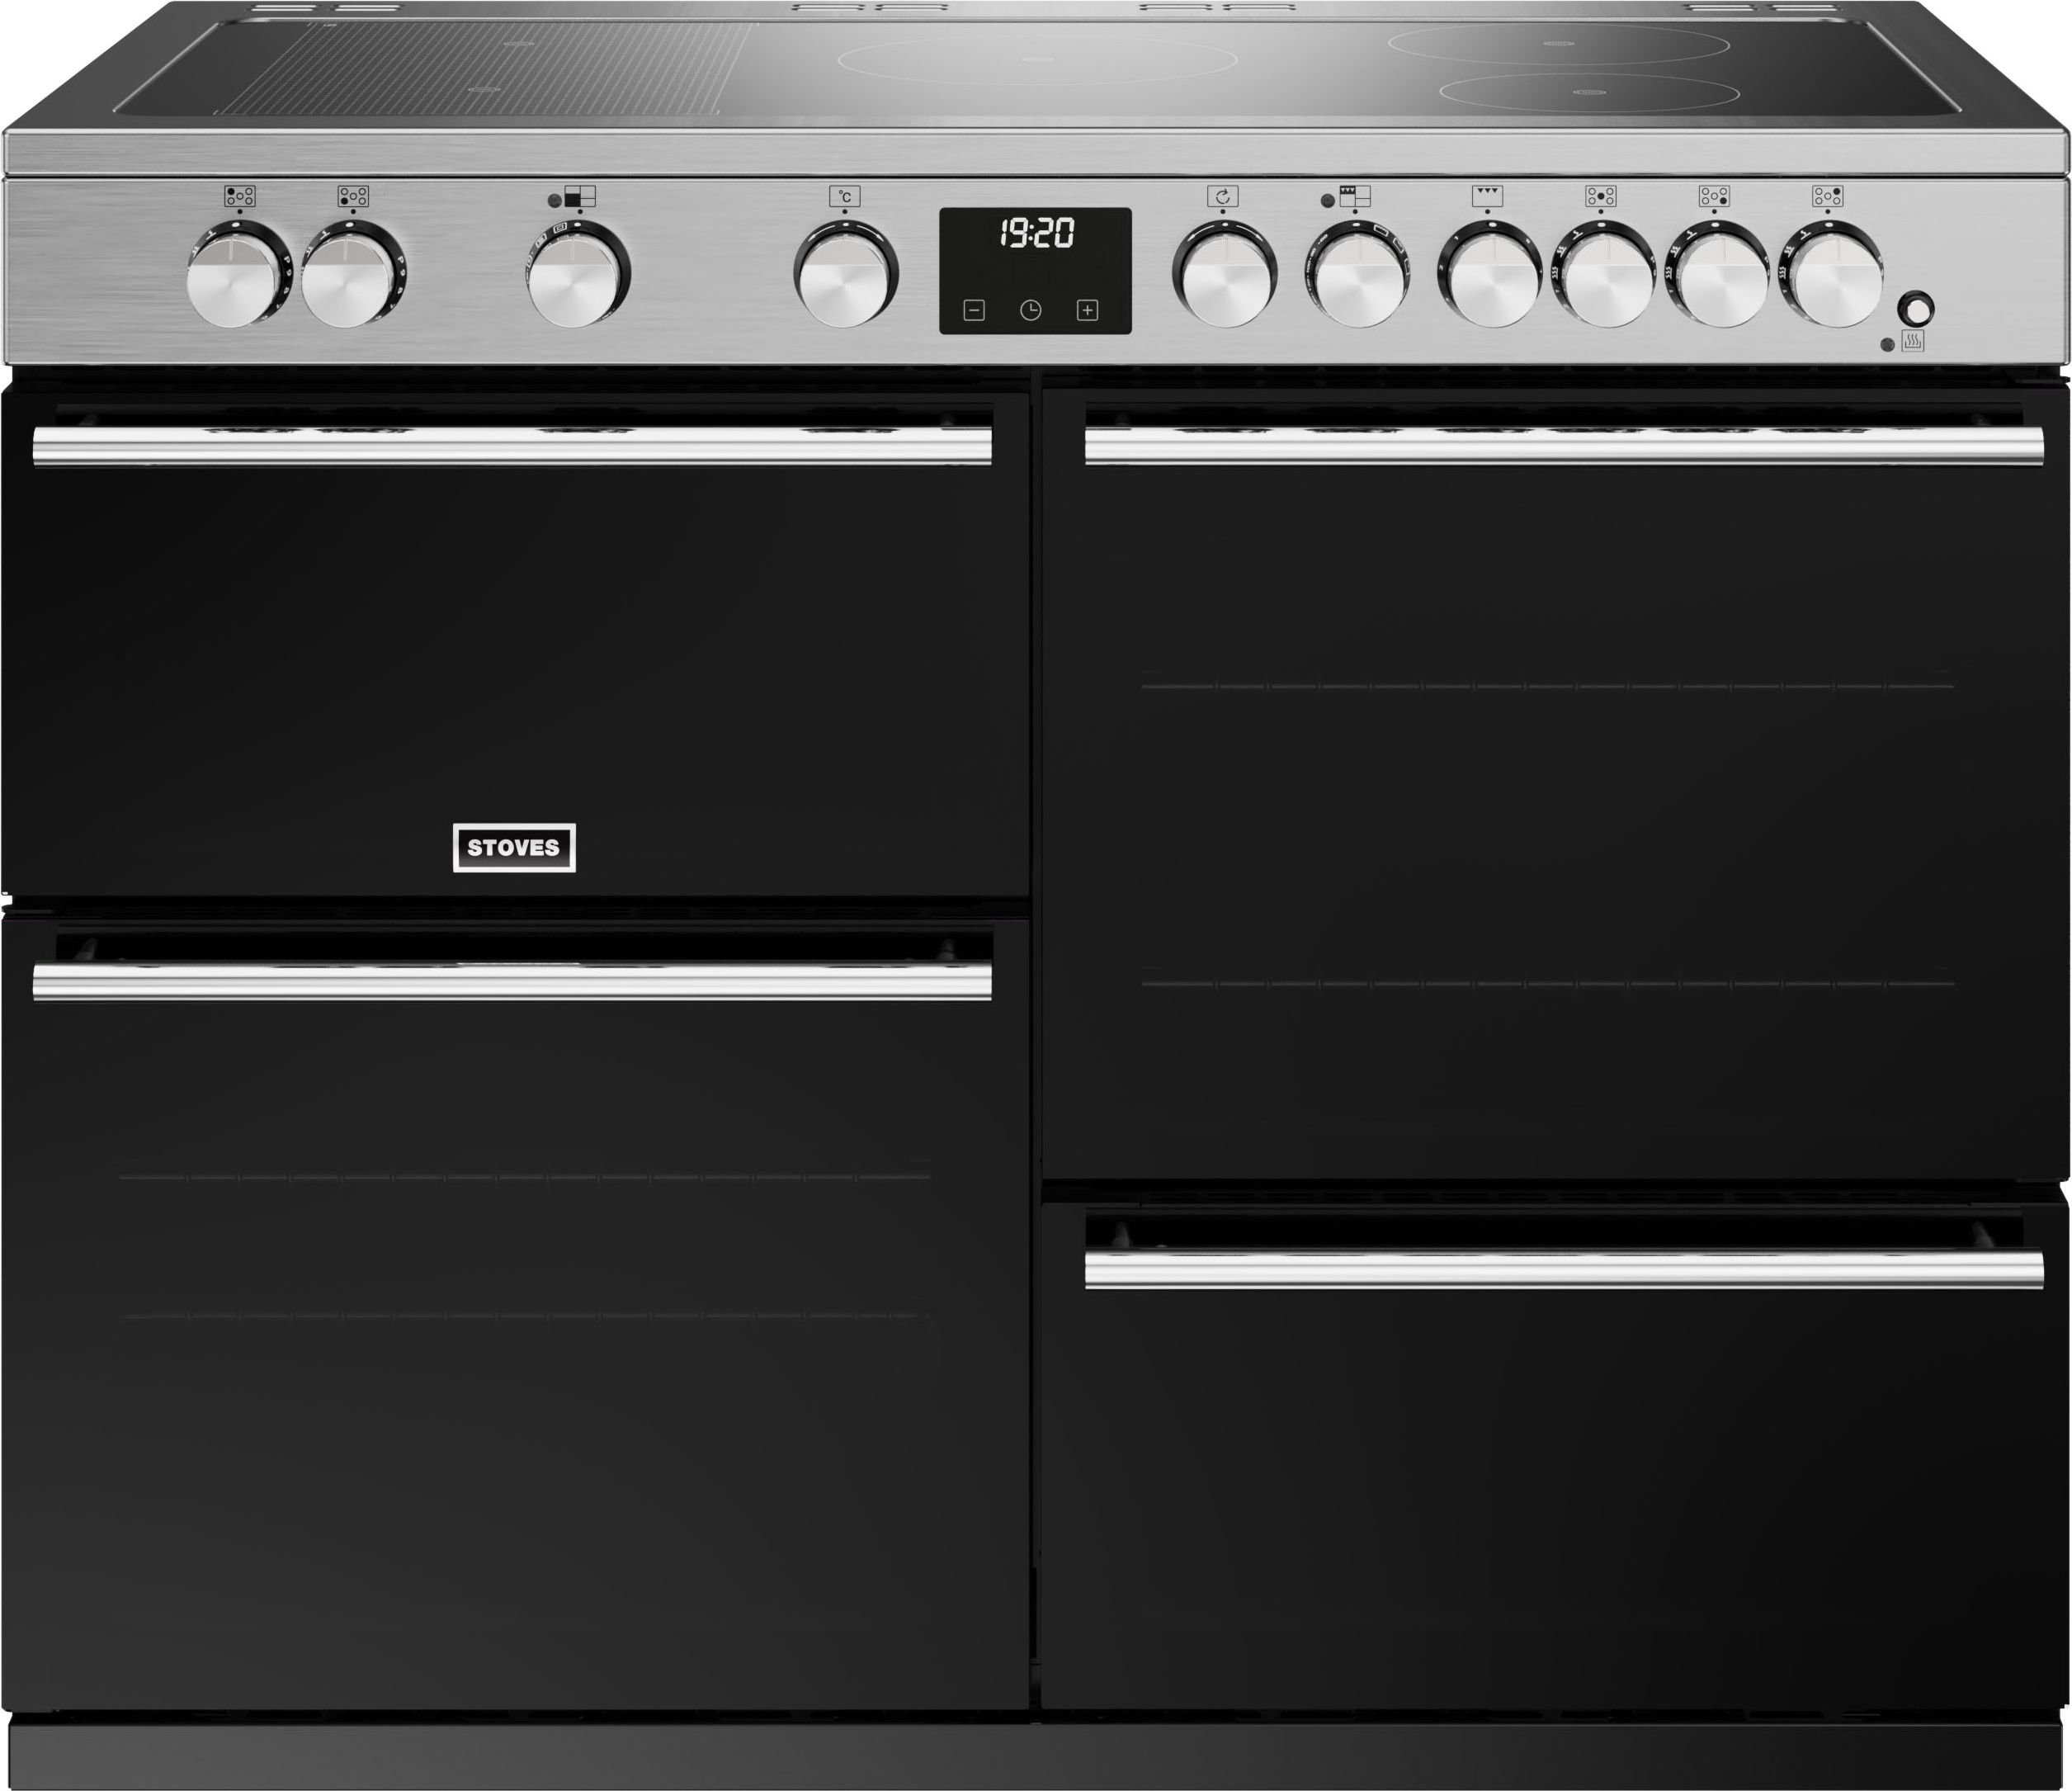 Stoves Precision Deluxe ST DX PREC D1100Ei RTY SS Electric Range Cooker with Induction Hob - Stainless Steel - A Rated, Stainless Steel